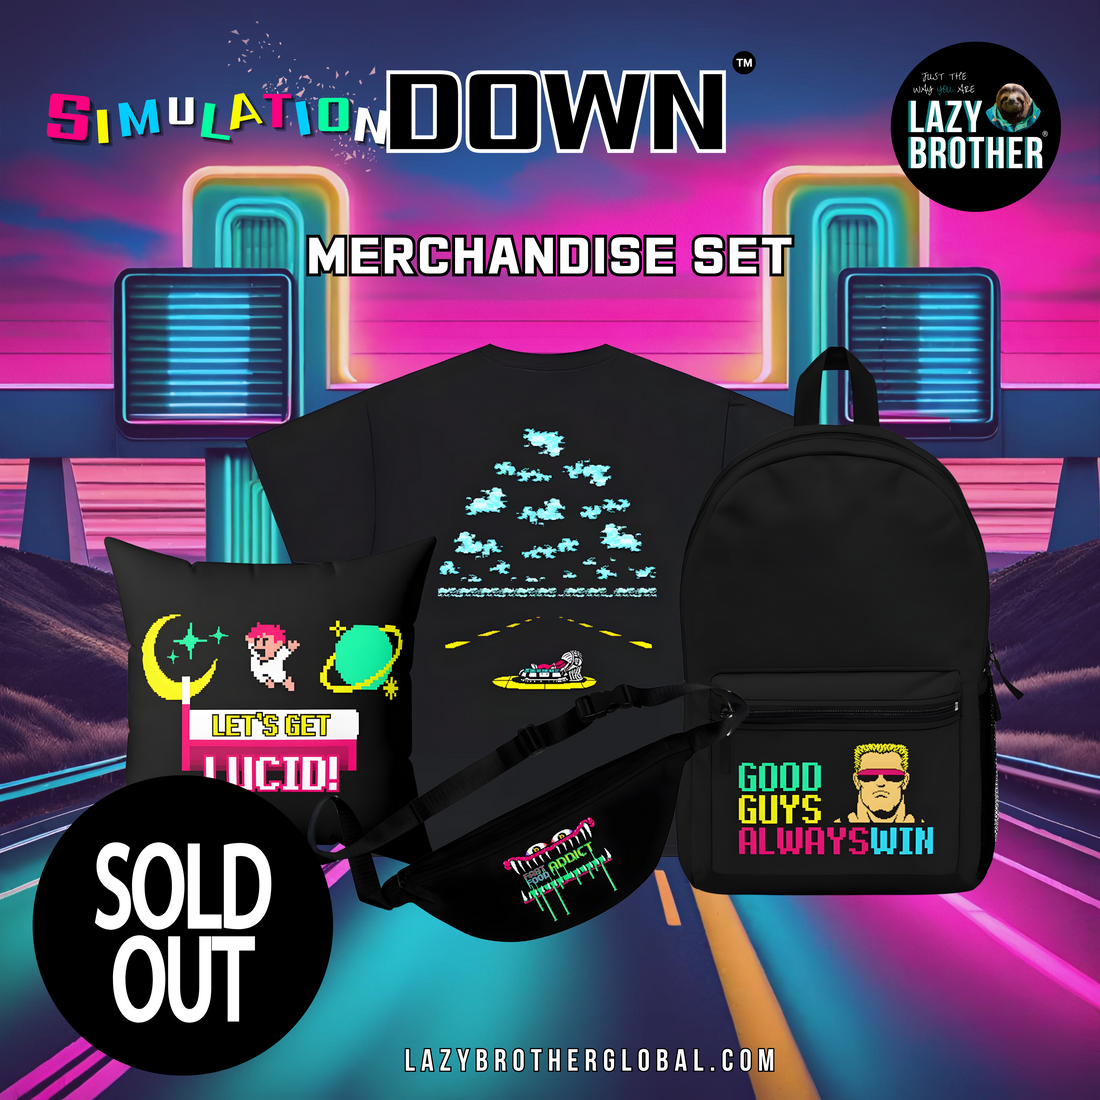 Simulation Down First Wave Sold Out!